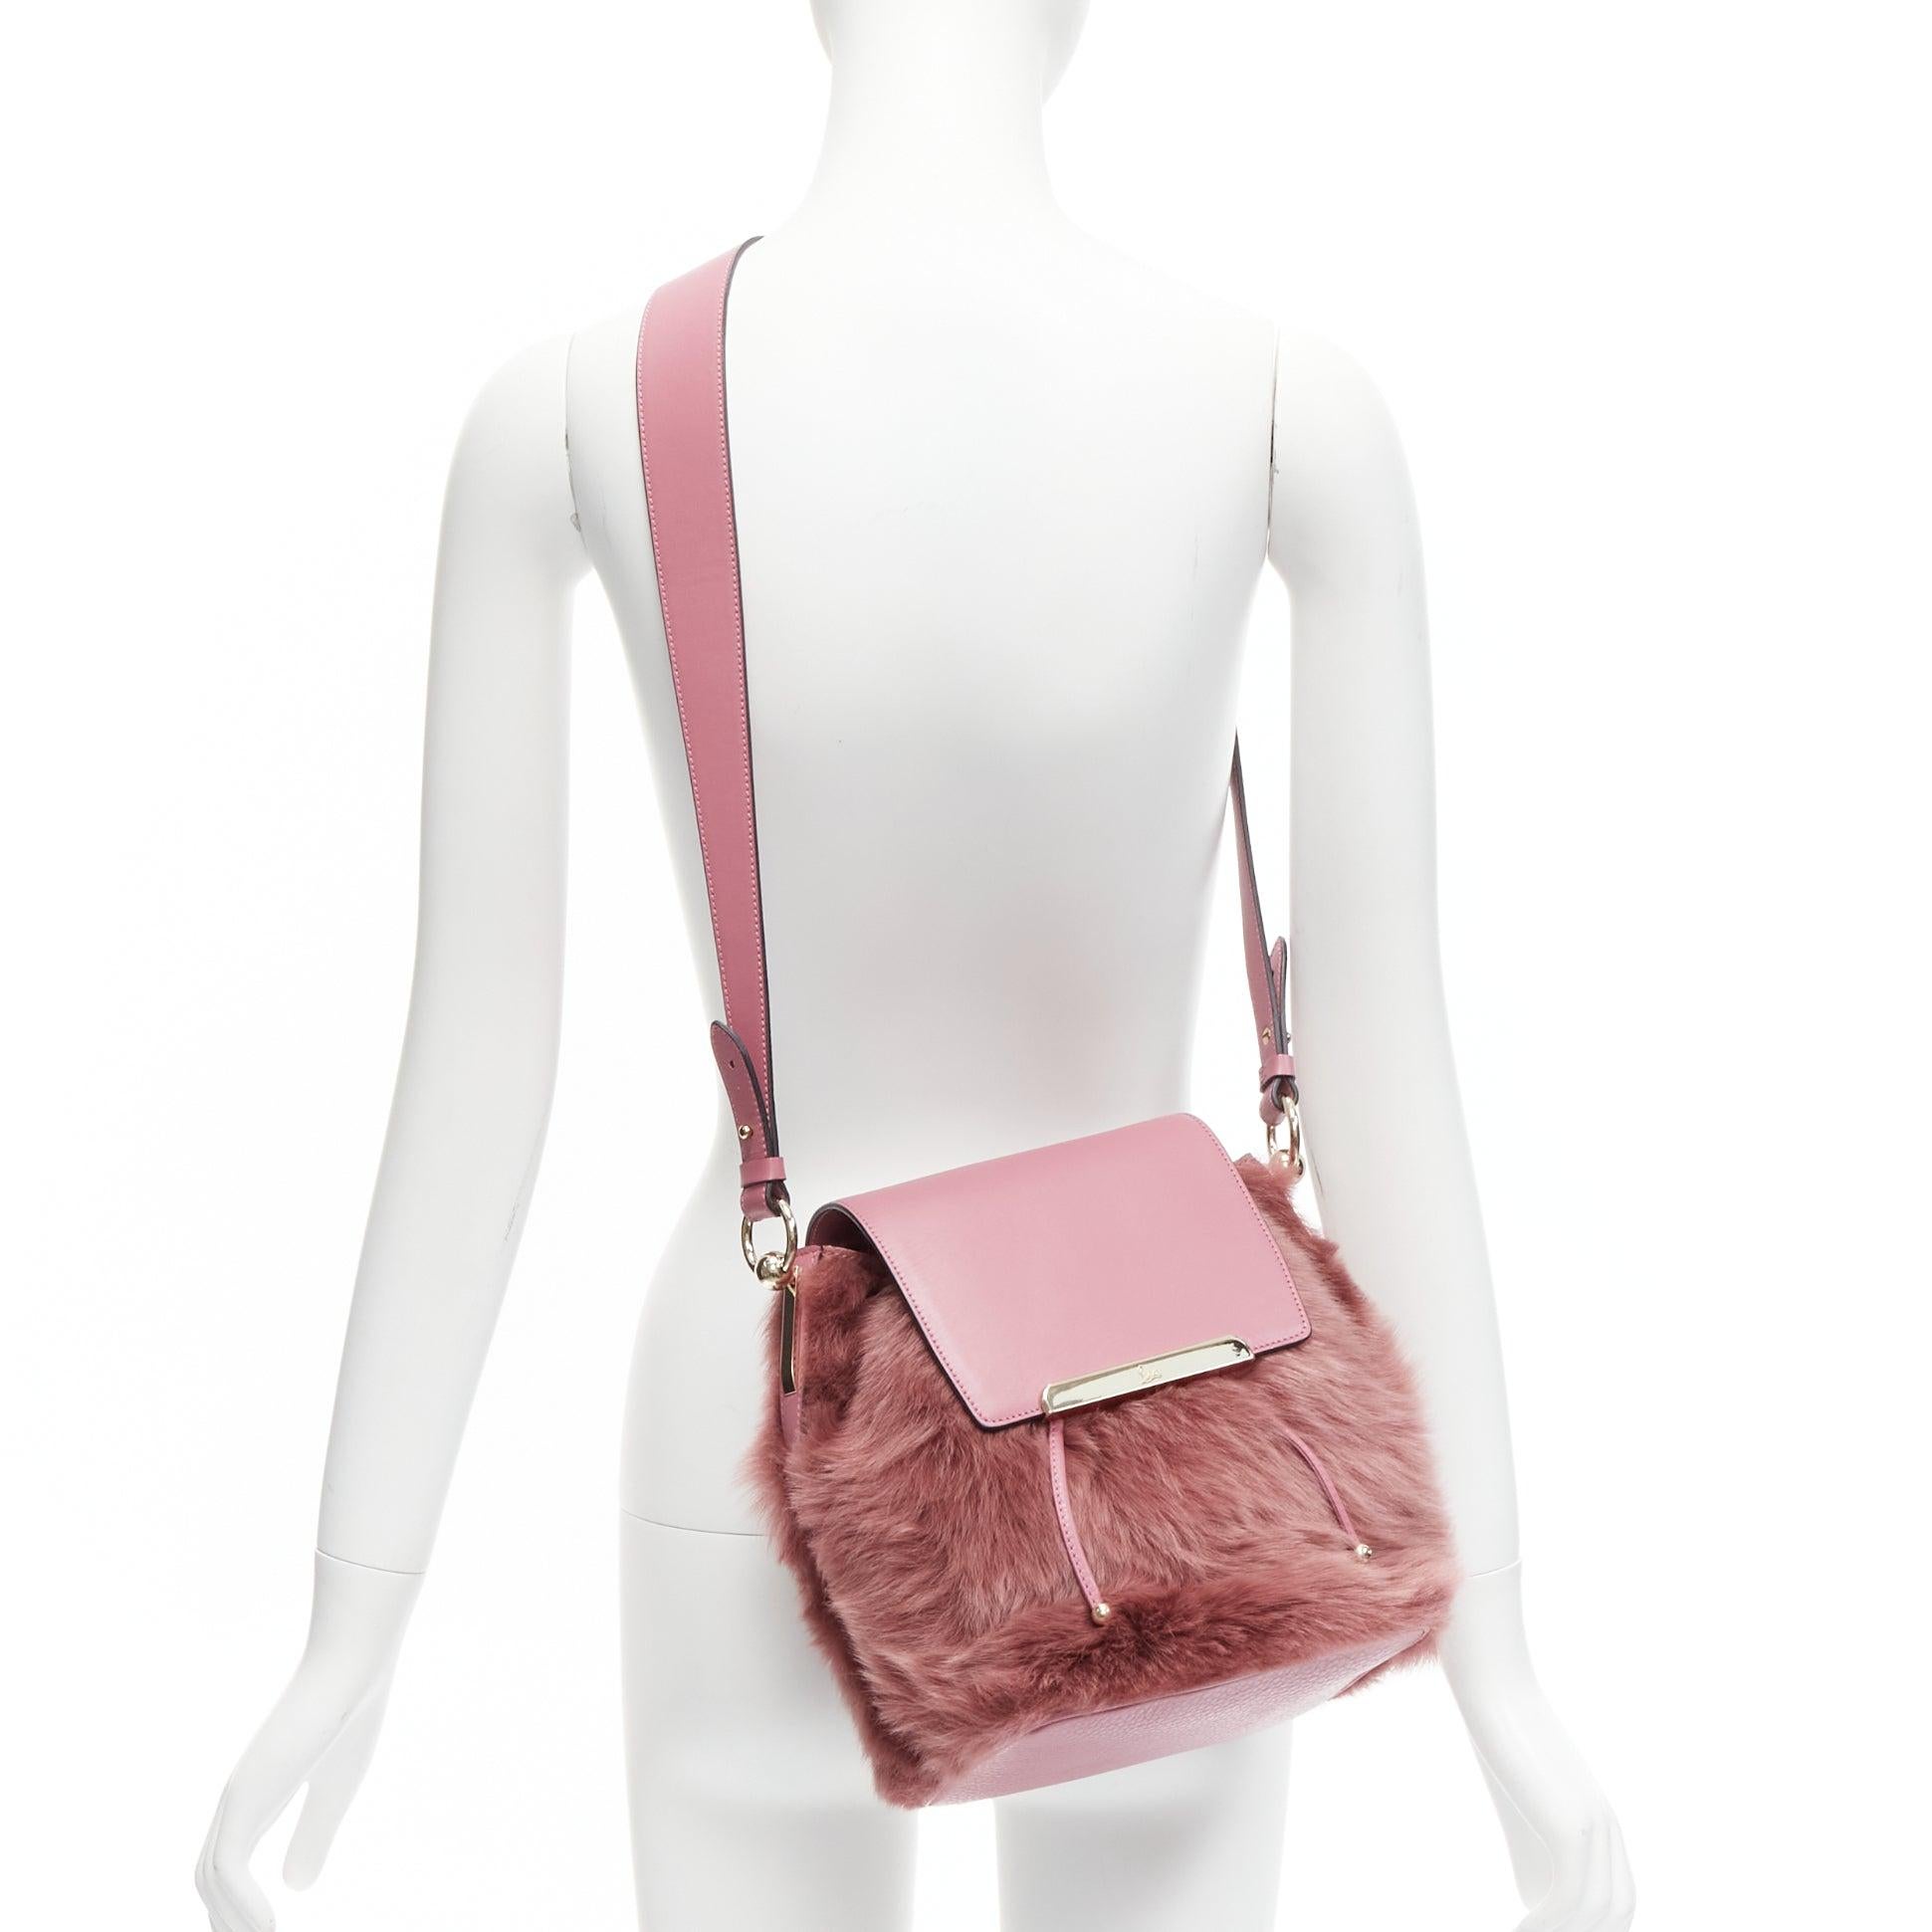 rare CHRISTIAN LOUBOUTIN Luckyl pink lamb fur 2 way shoulder bucket bag backpack
Reference: TGAS/D00689
Brand: Christian Louboutin
Model: Luckyl
Material: Fur, Leather
Color: Pink, Rose Gold
Pattern: Solid
Closure: Drawstring
Lining: Red